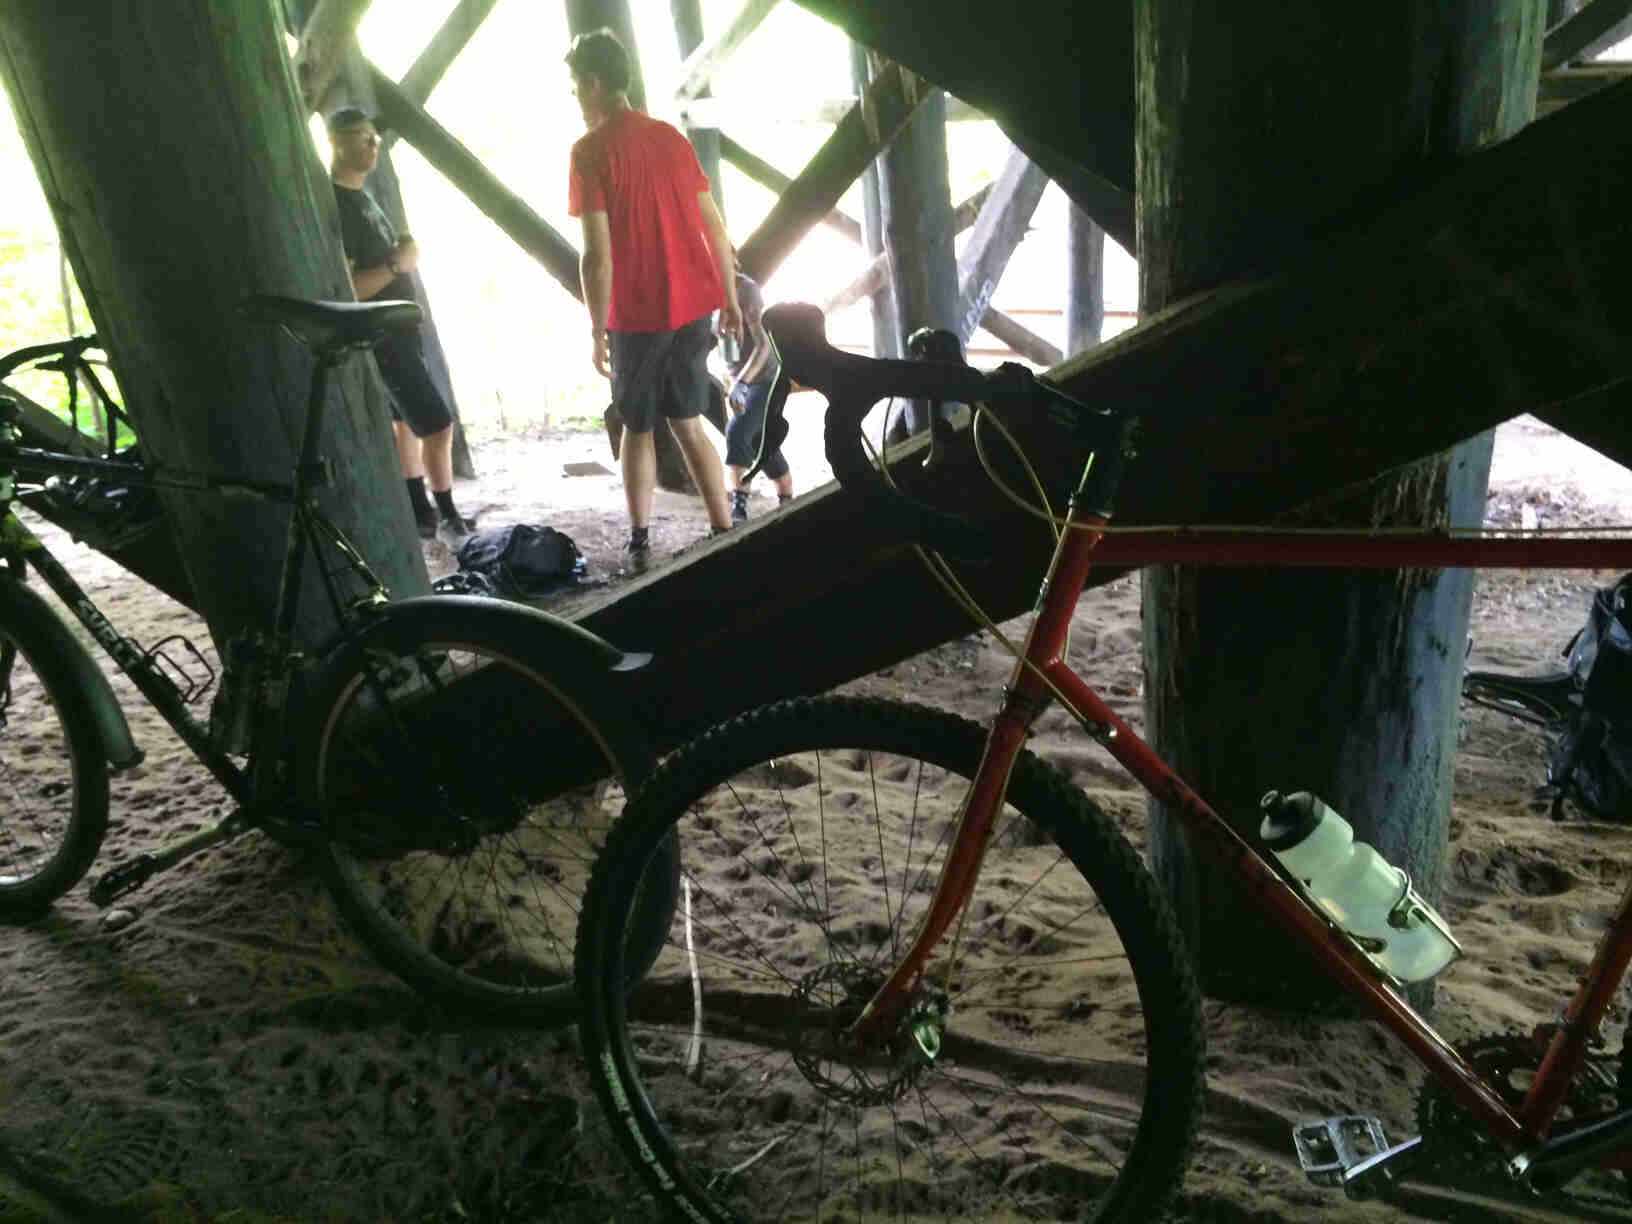 Left side view of 2 Surly bikes, leaning on a post single-filed under a pier, with 3 people standing near